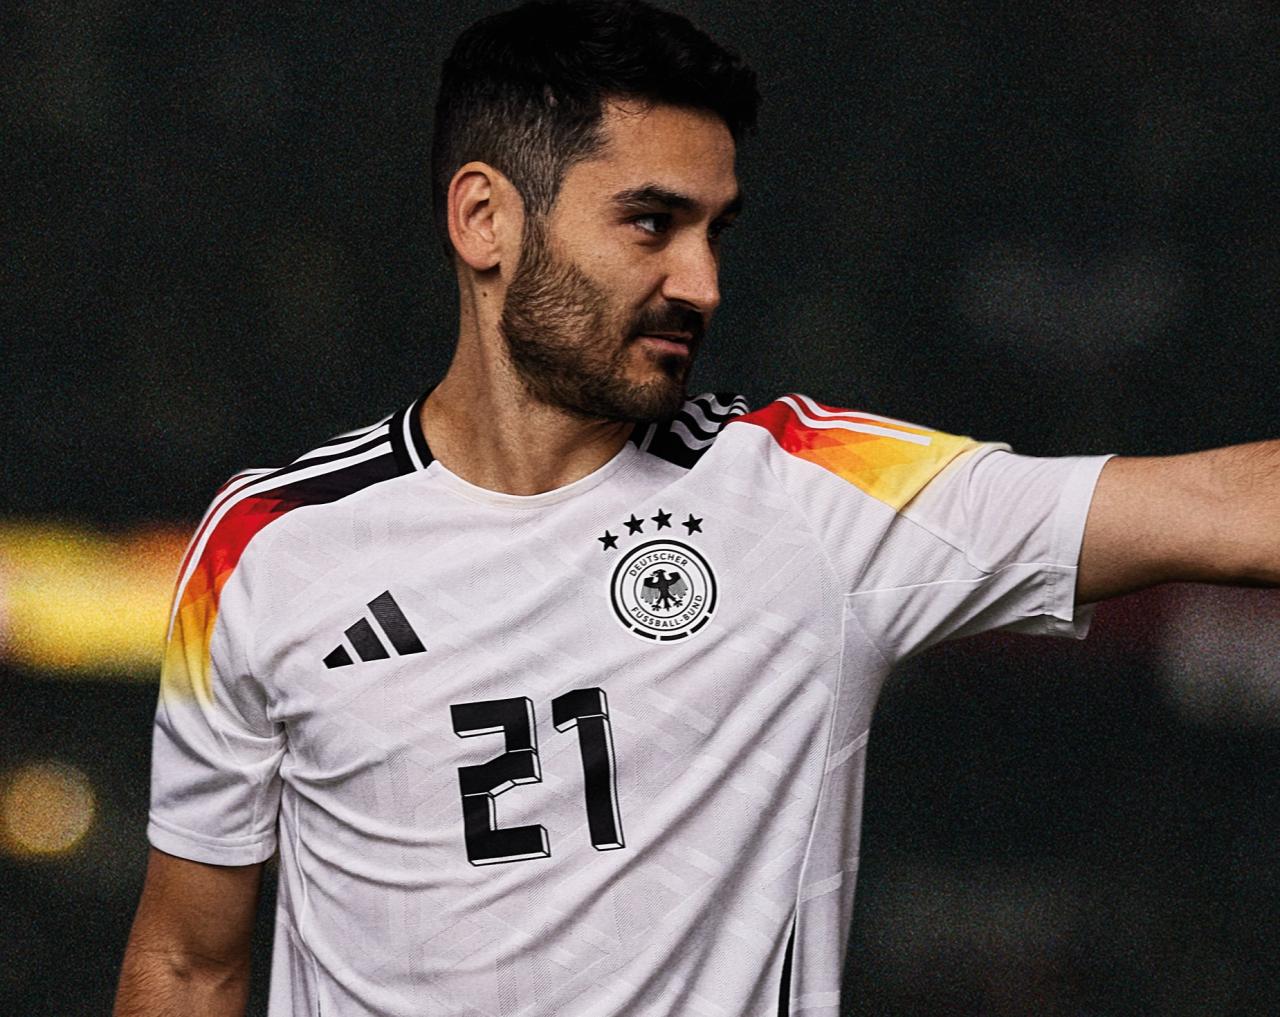 “It was really good for the spirit” – Gündogan reflects on stalemate with Switzerland